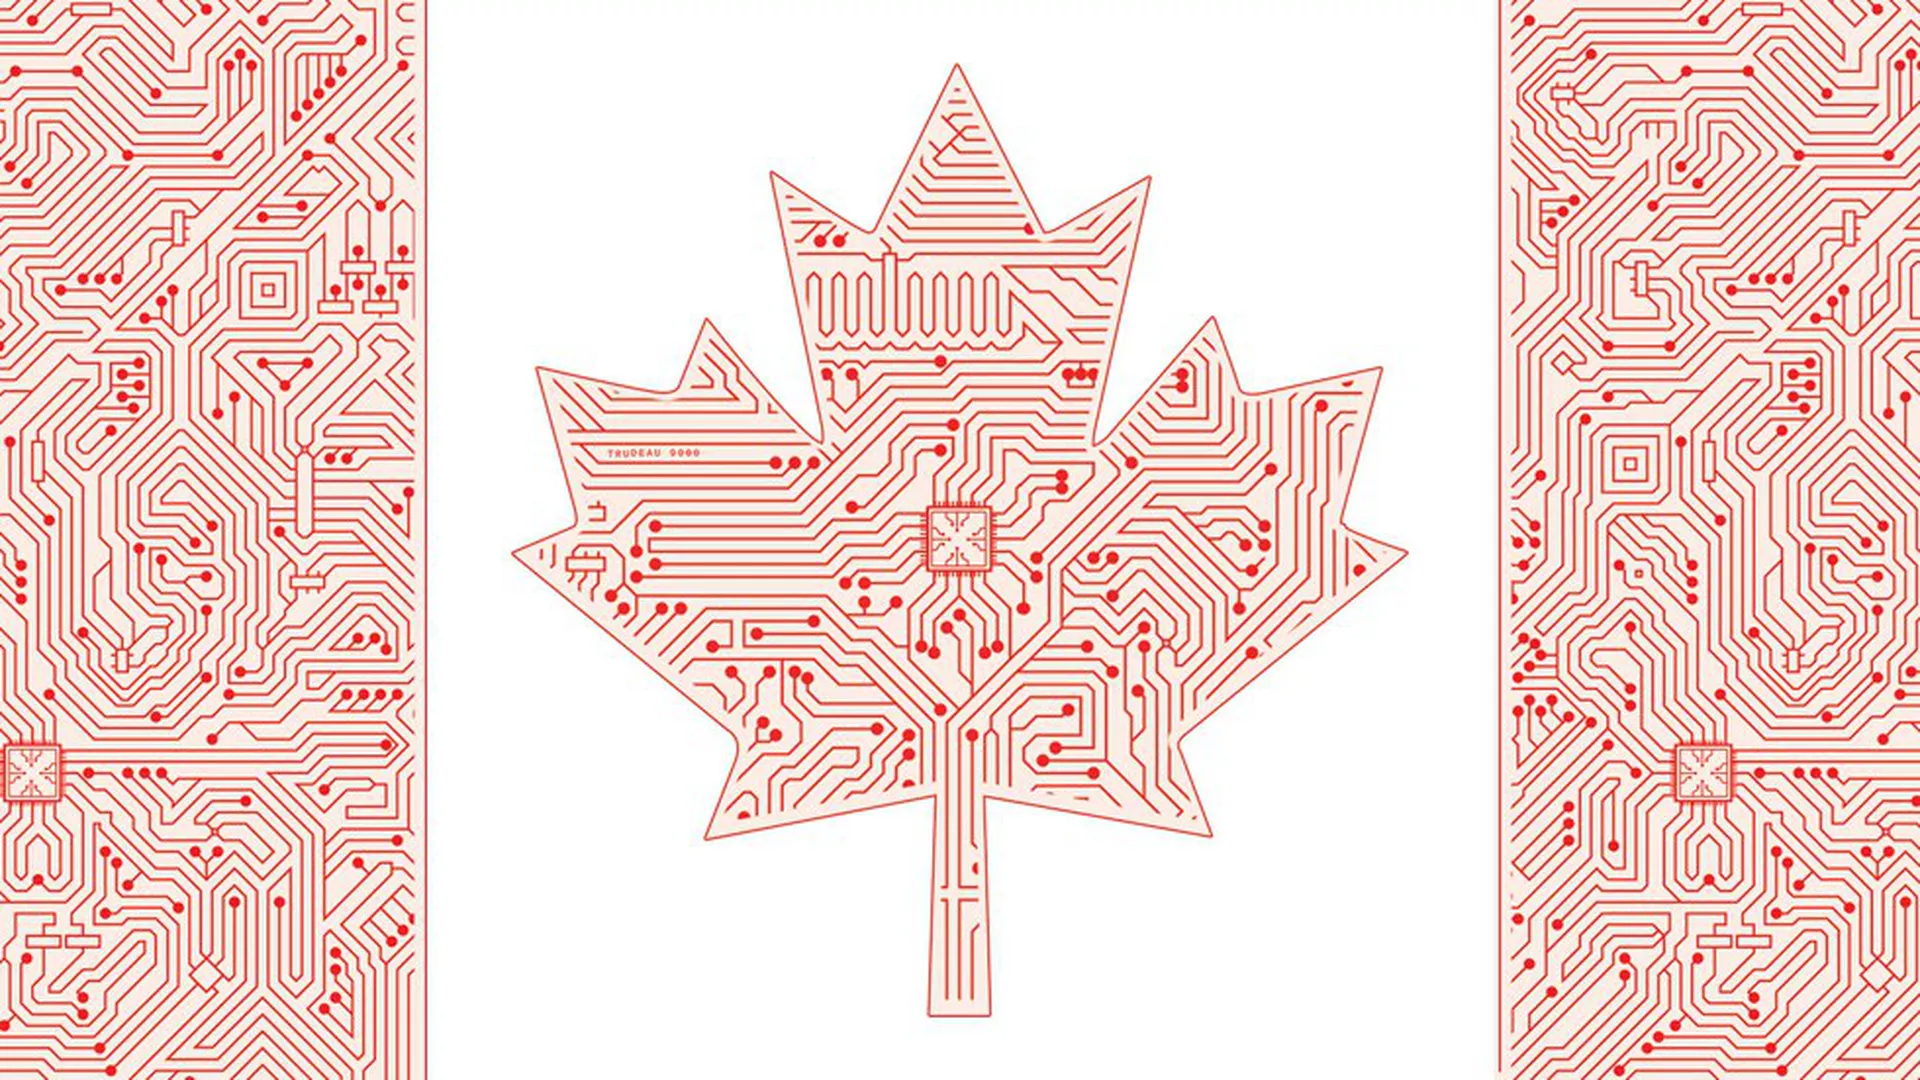 Illustration of the Canadian flag composed of tech circuitry.